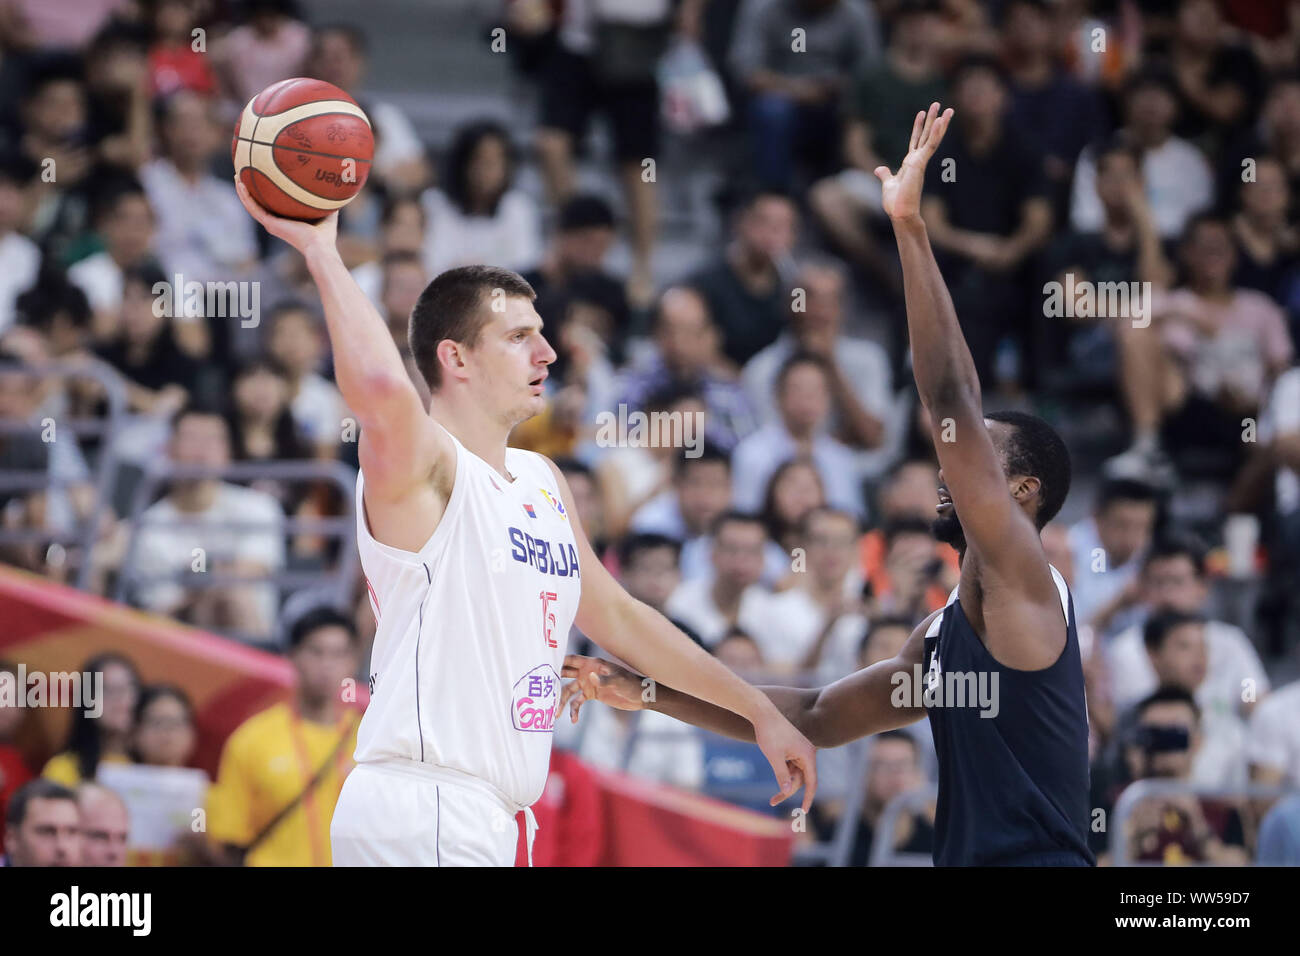 Nikola Jokic of Serbia, left, keeps the ball during the 5th – 8th classification round against the United States of FIBA Basketball World Cup in Dongguan, south China's Guangdong province, 12 September 2019. The United States is beaten by Serbia with 94-89 at 5th – 8th classification round of FIBA World Cup in Dongguan, south China's Guangdong province, 12 September 2019. Stock Photo